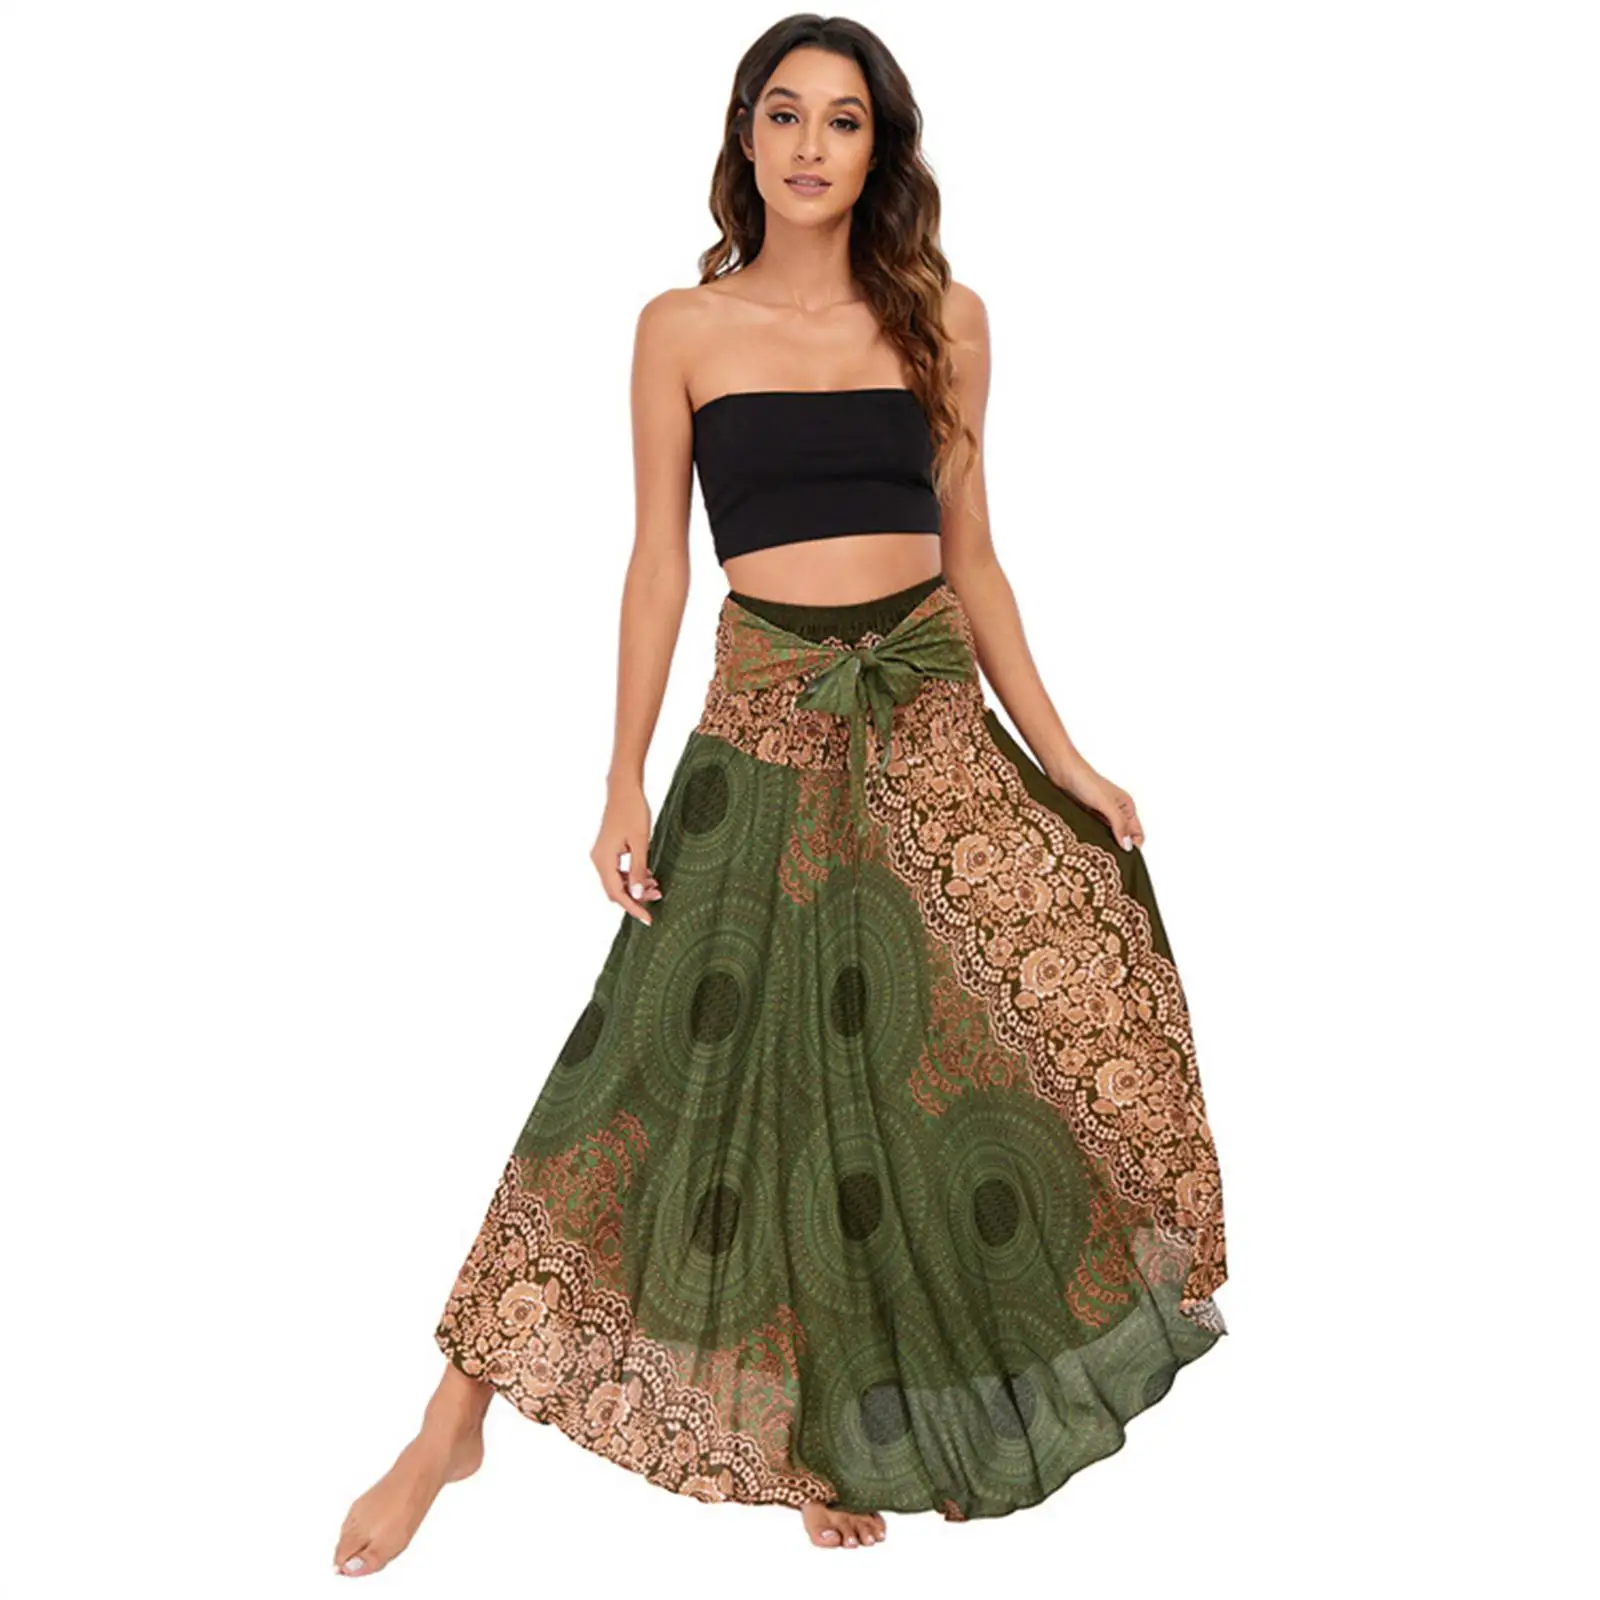 Fashion  Maxi Skirt  Hippie Style Wrap Dancing Costume Clothing